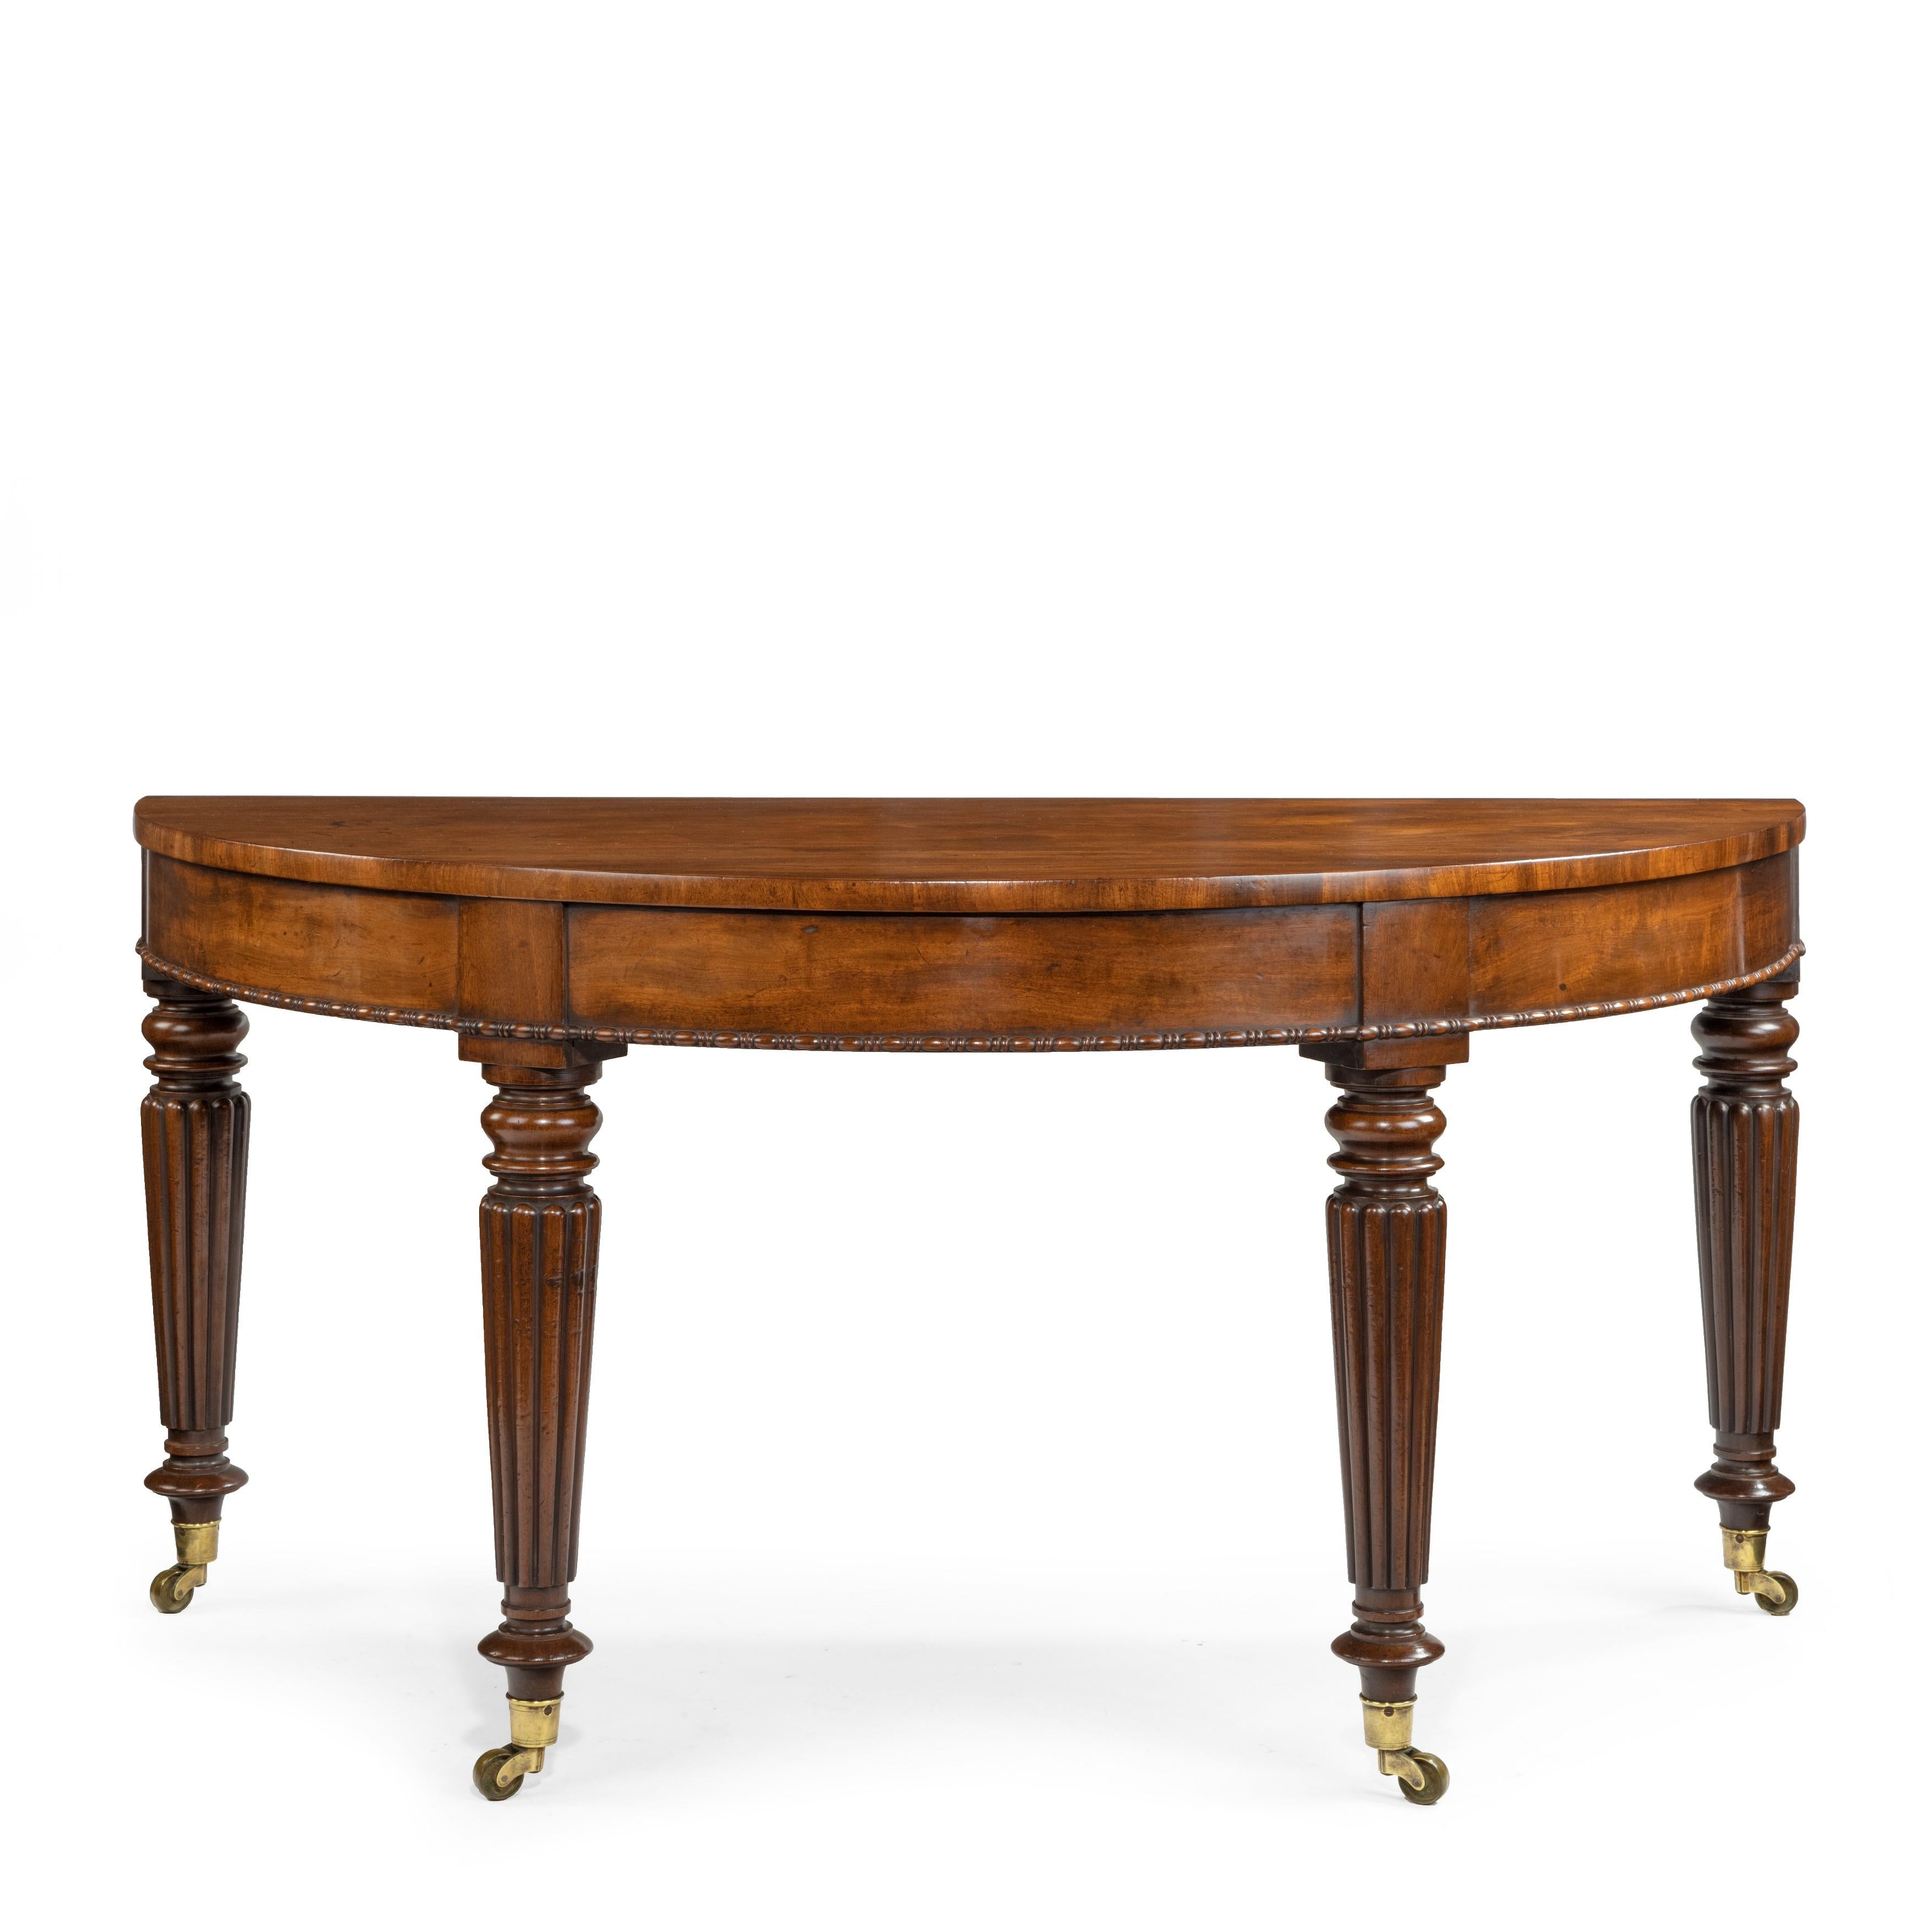 Brass Early Victorian Mahogany Console Tables Attributed to Gillows